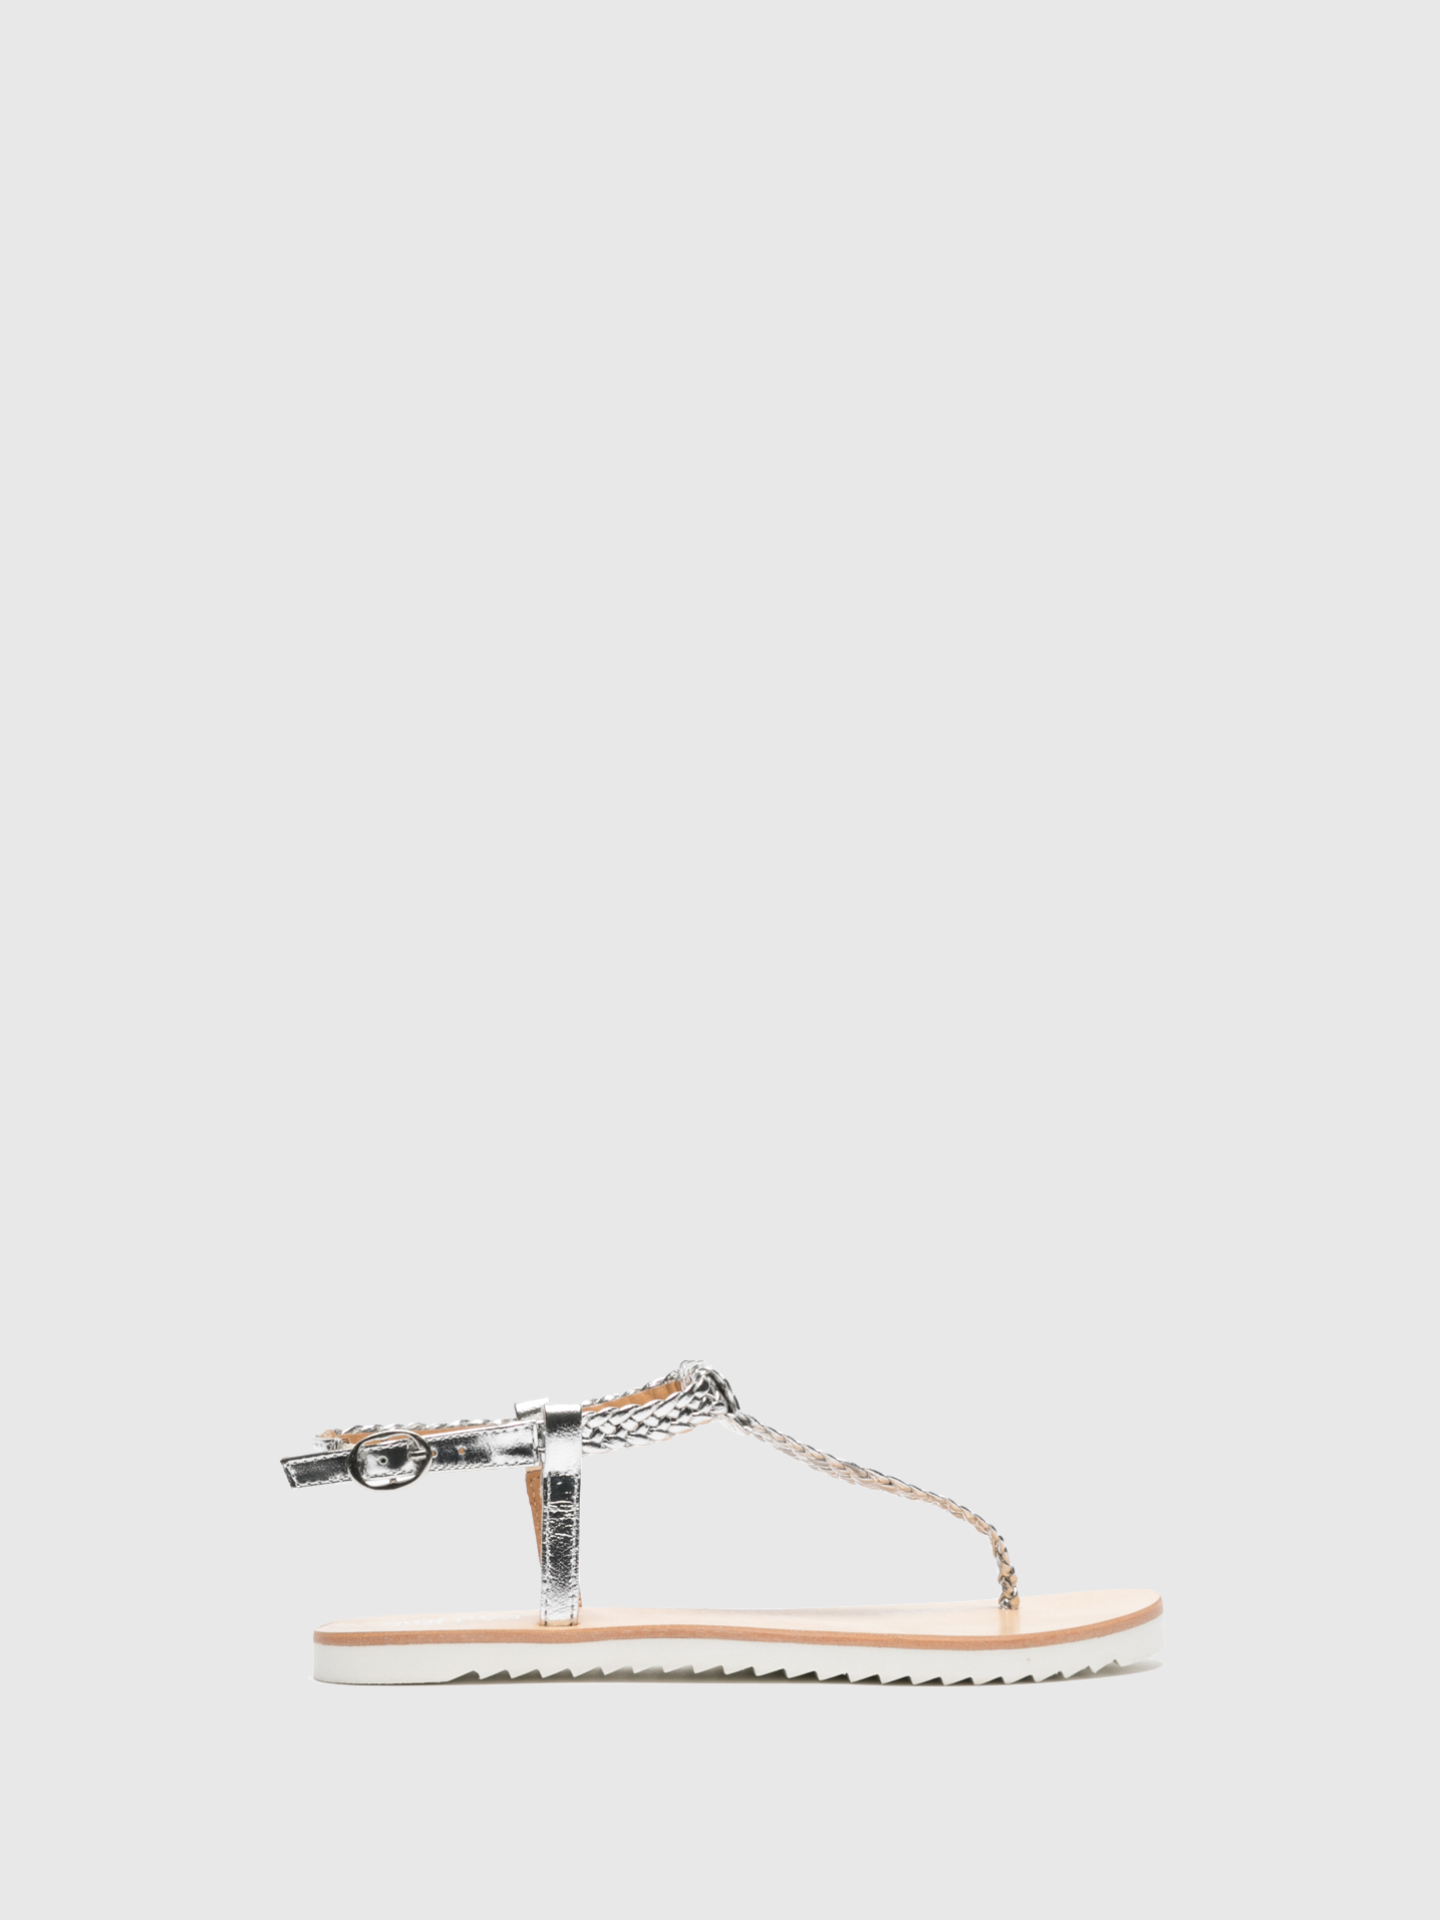 Foreva Silver Flat Sandals